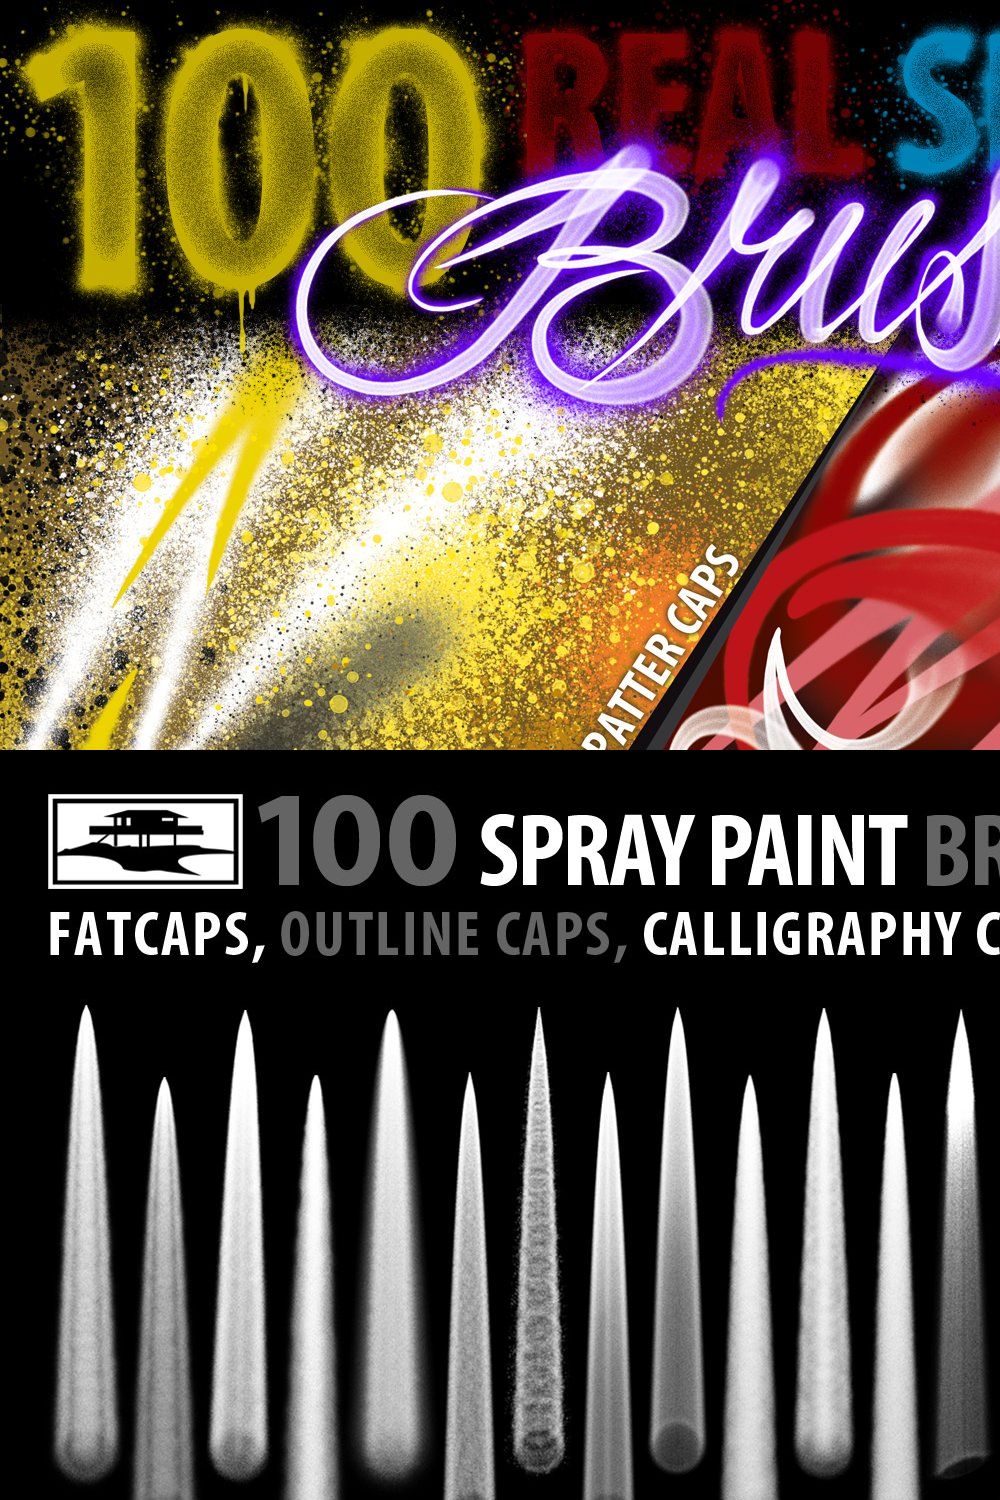 Raseone Real Spray Paint Brushes pinterest preview image.